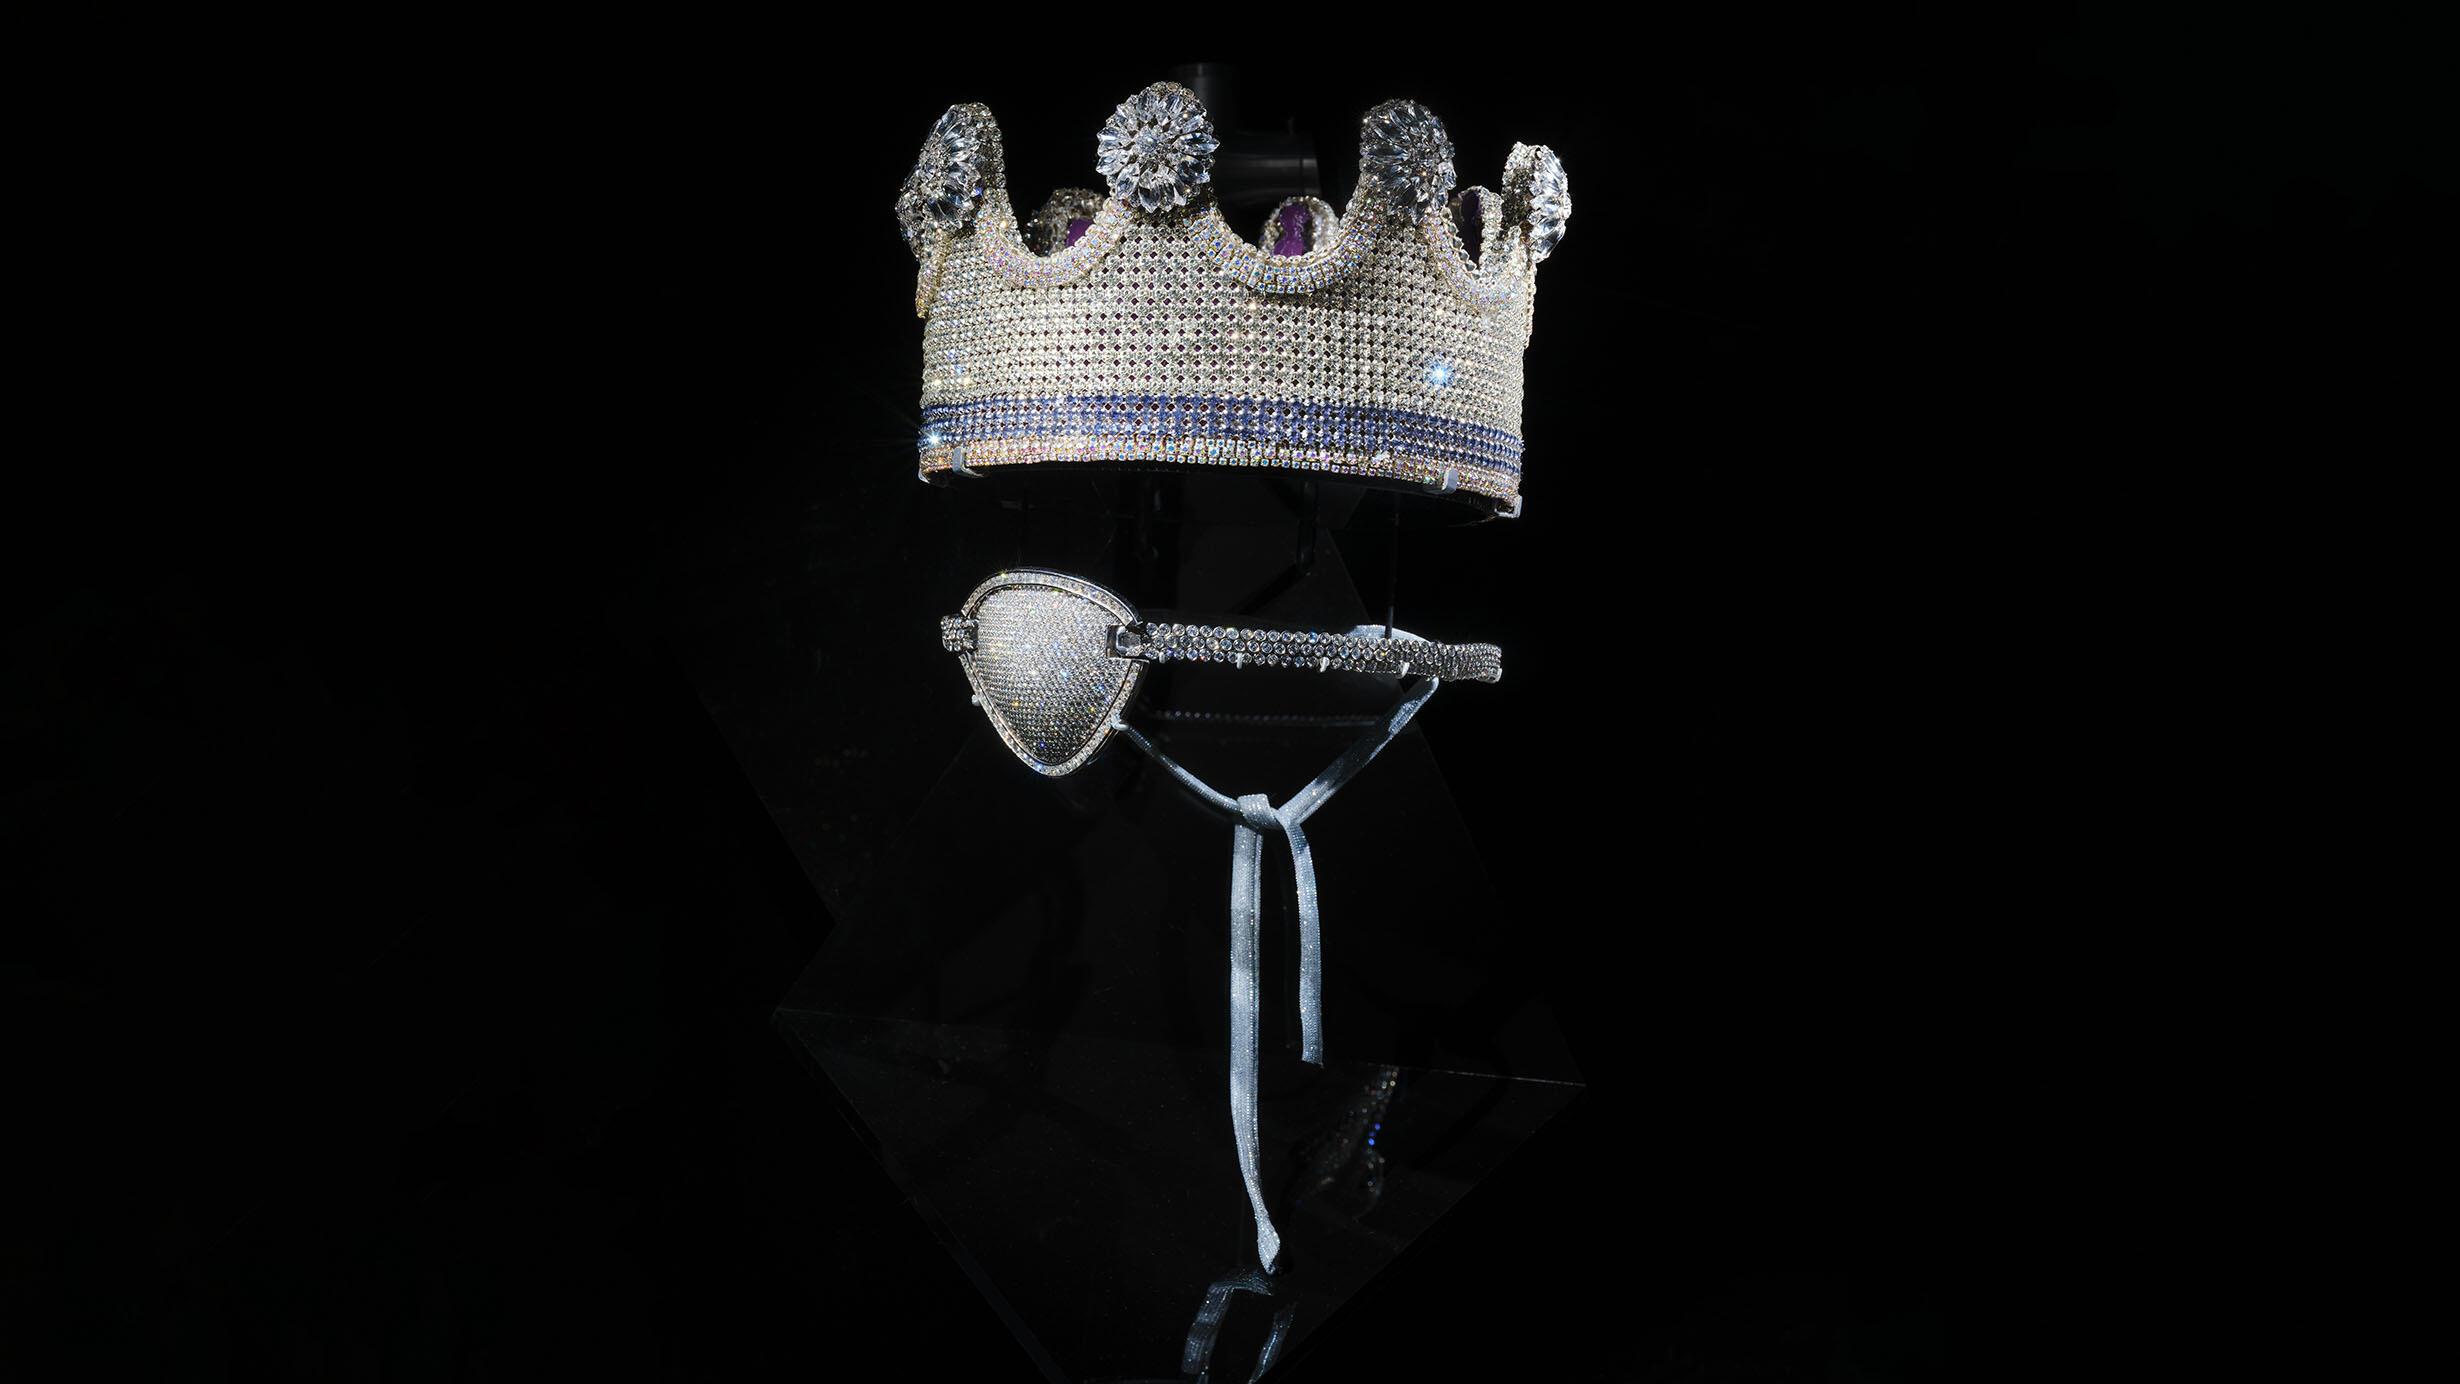 A jewel encrusted crown and eyepatch, featuring platinum and diamonds, against a dark background.